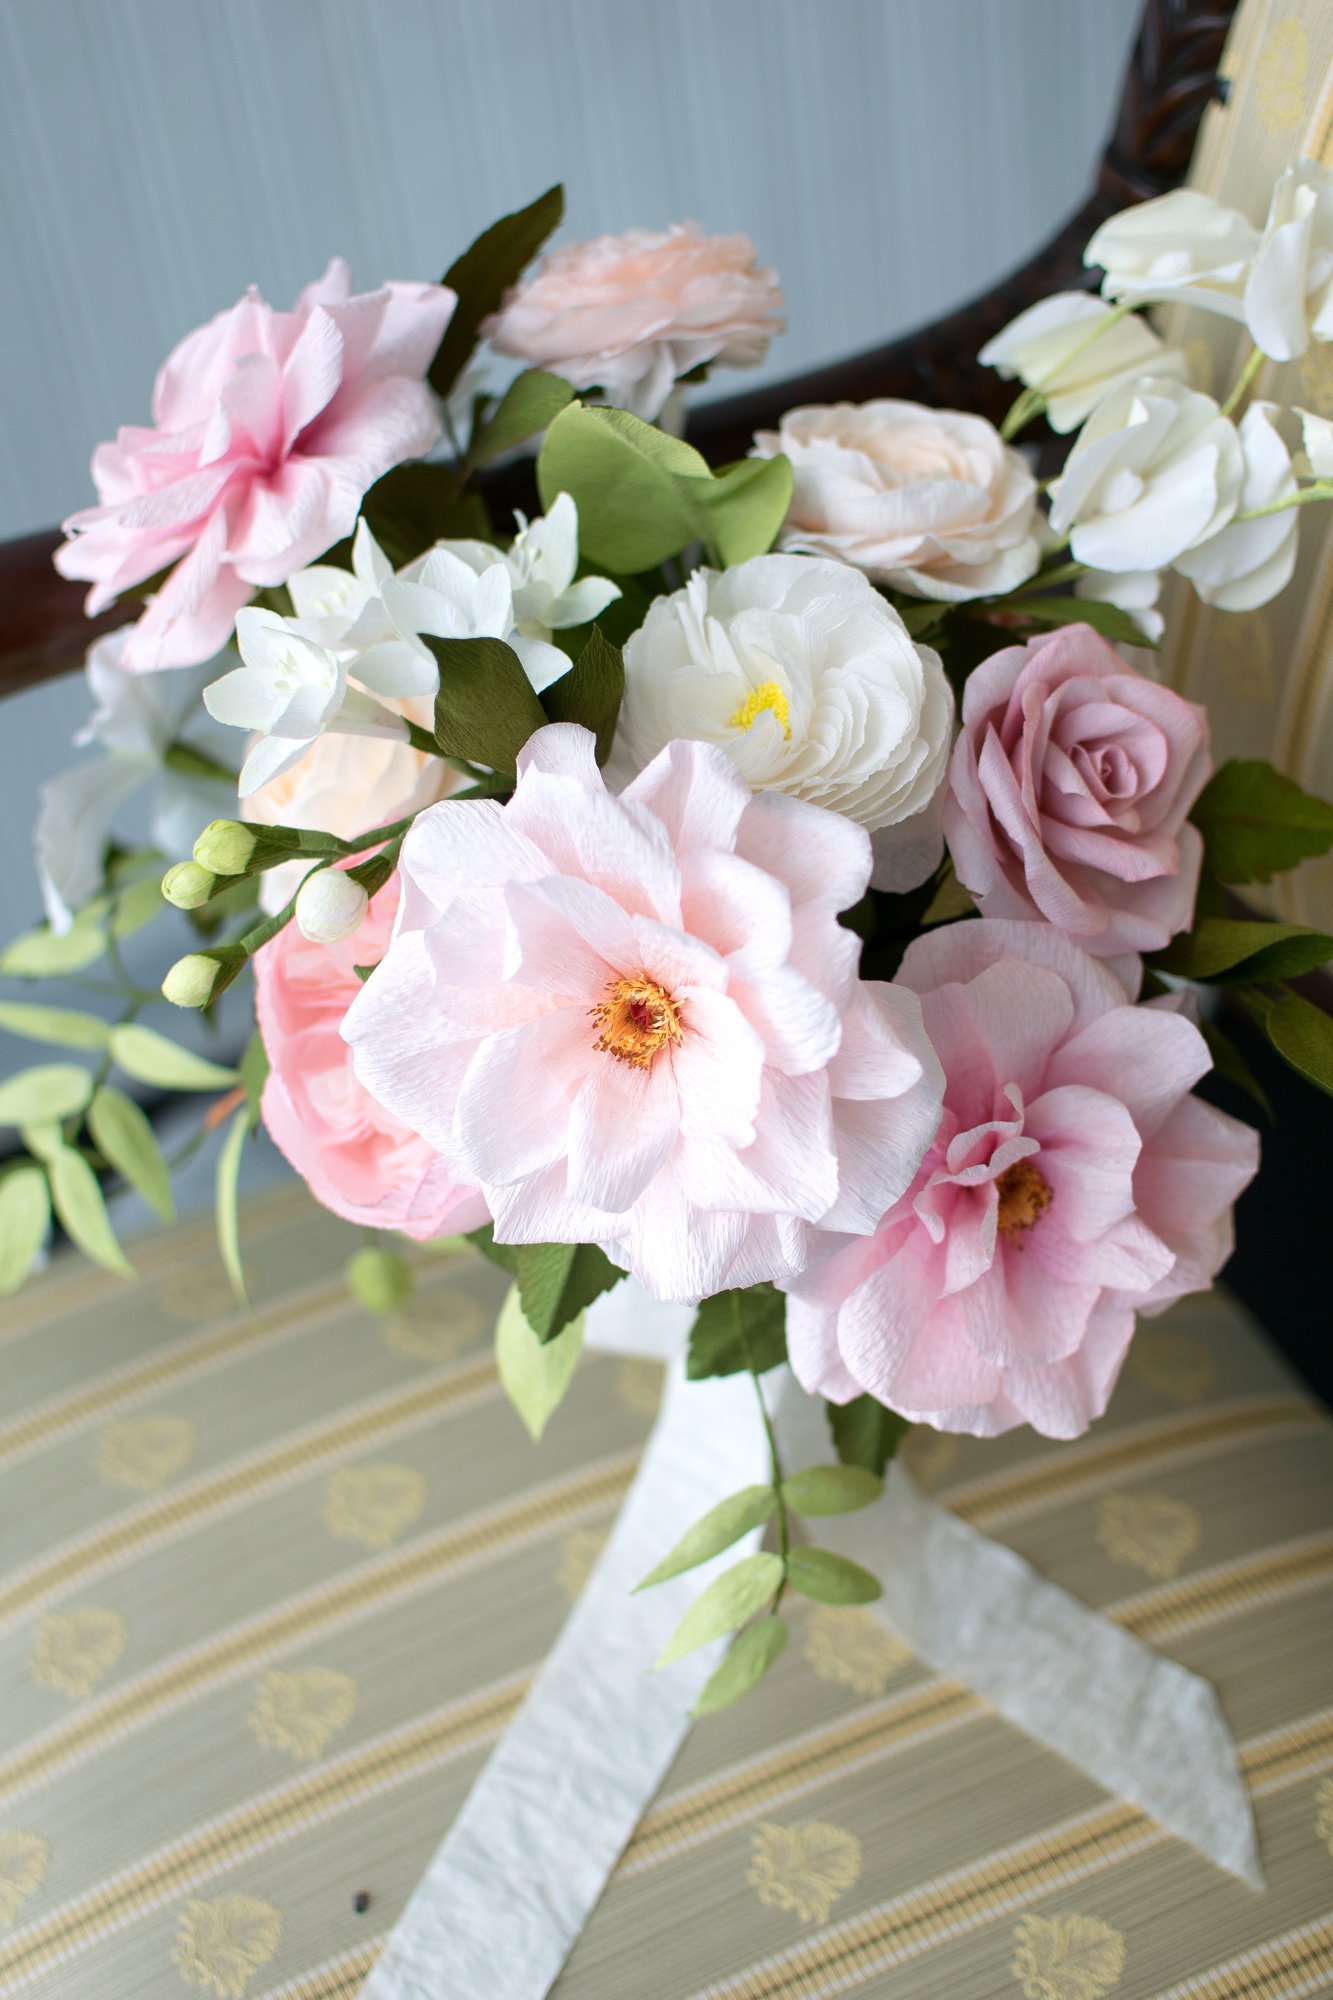 Pink-Blush-Paper-Bouquet-for-Maid-of-Honour-by-Crafted-to-Bloom-toppaperflowers.jpg